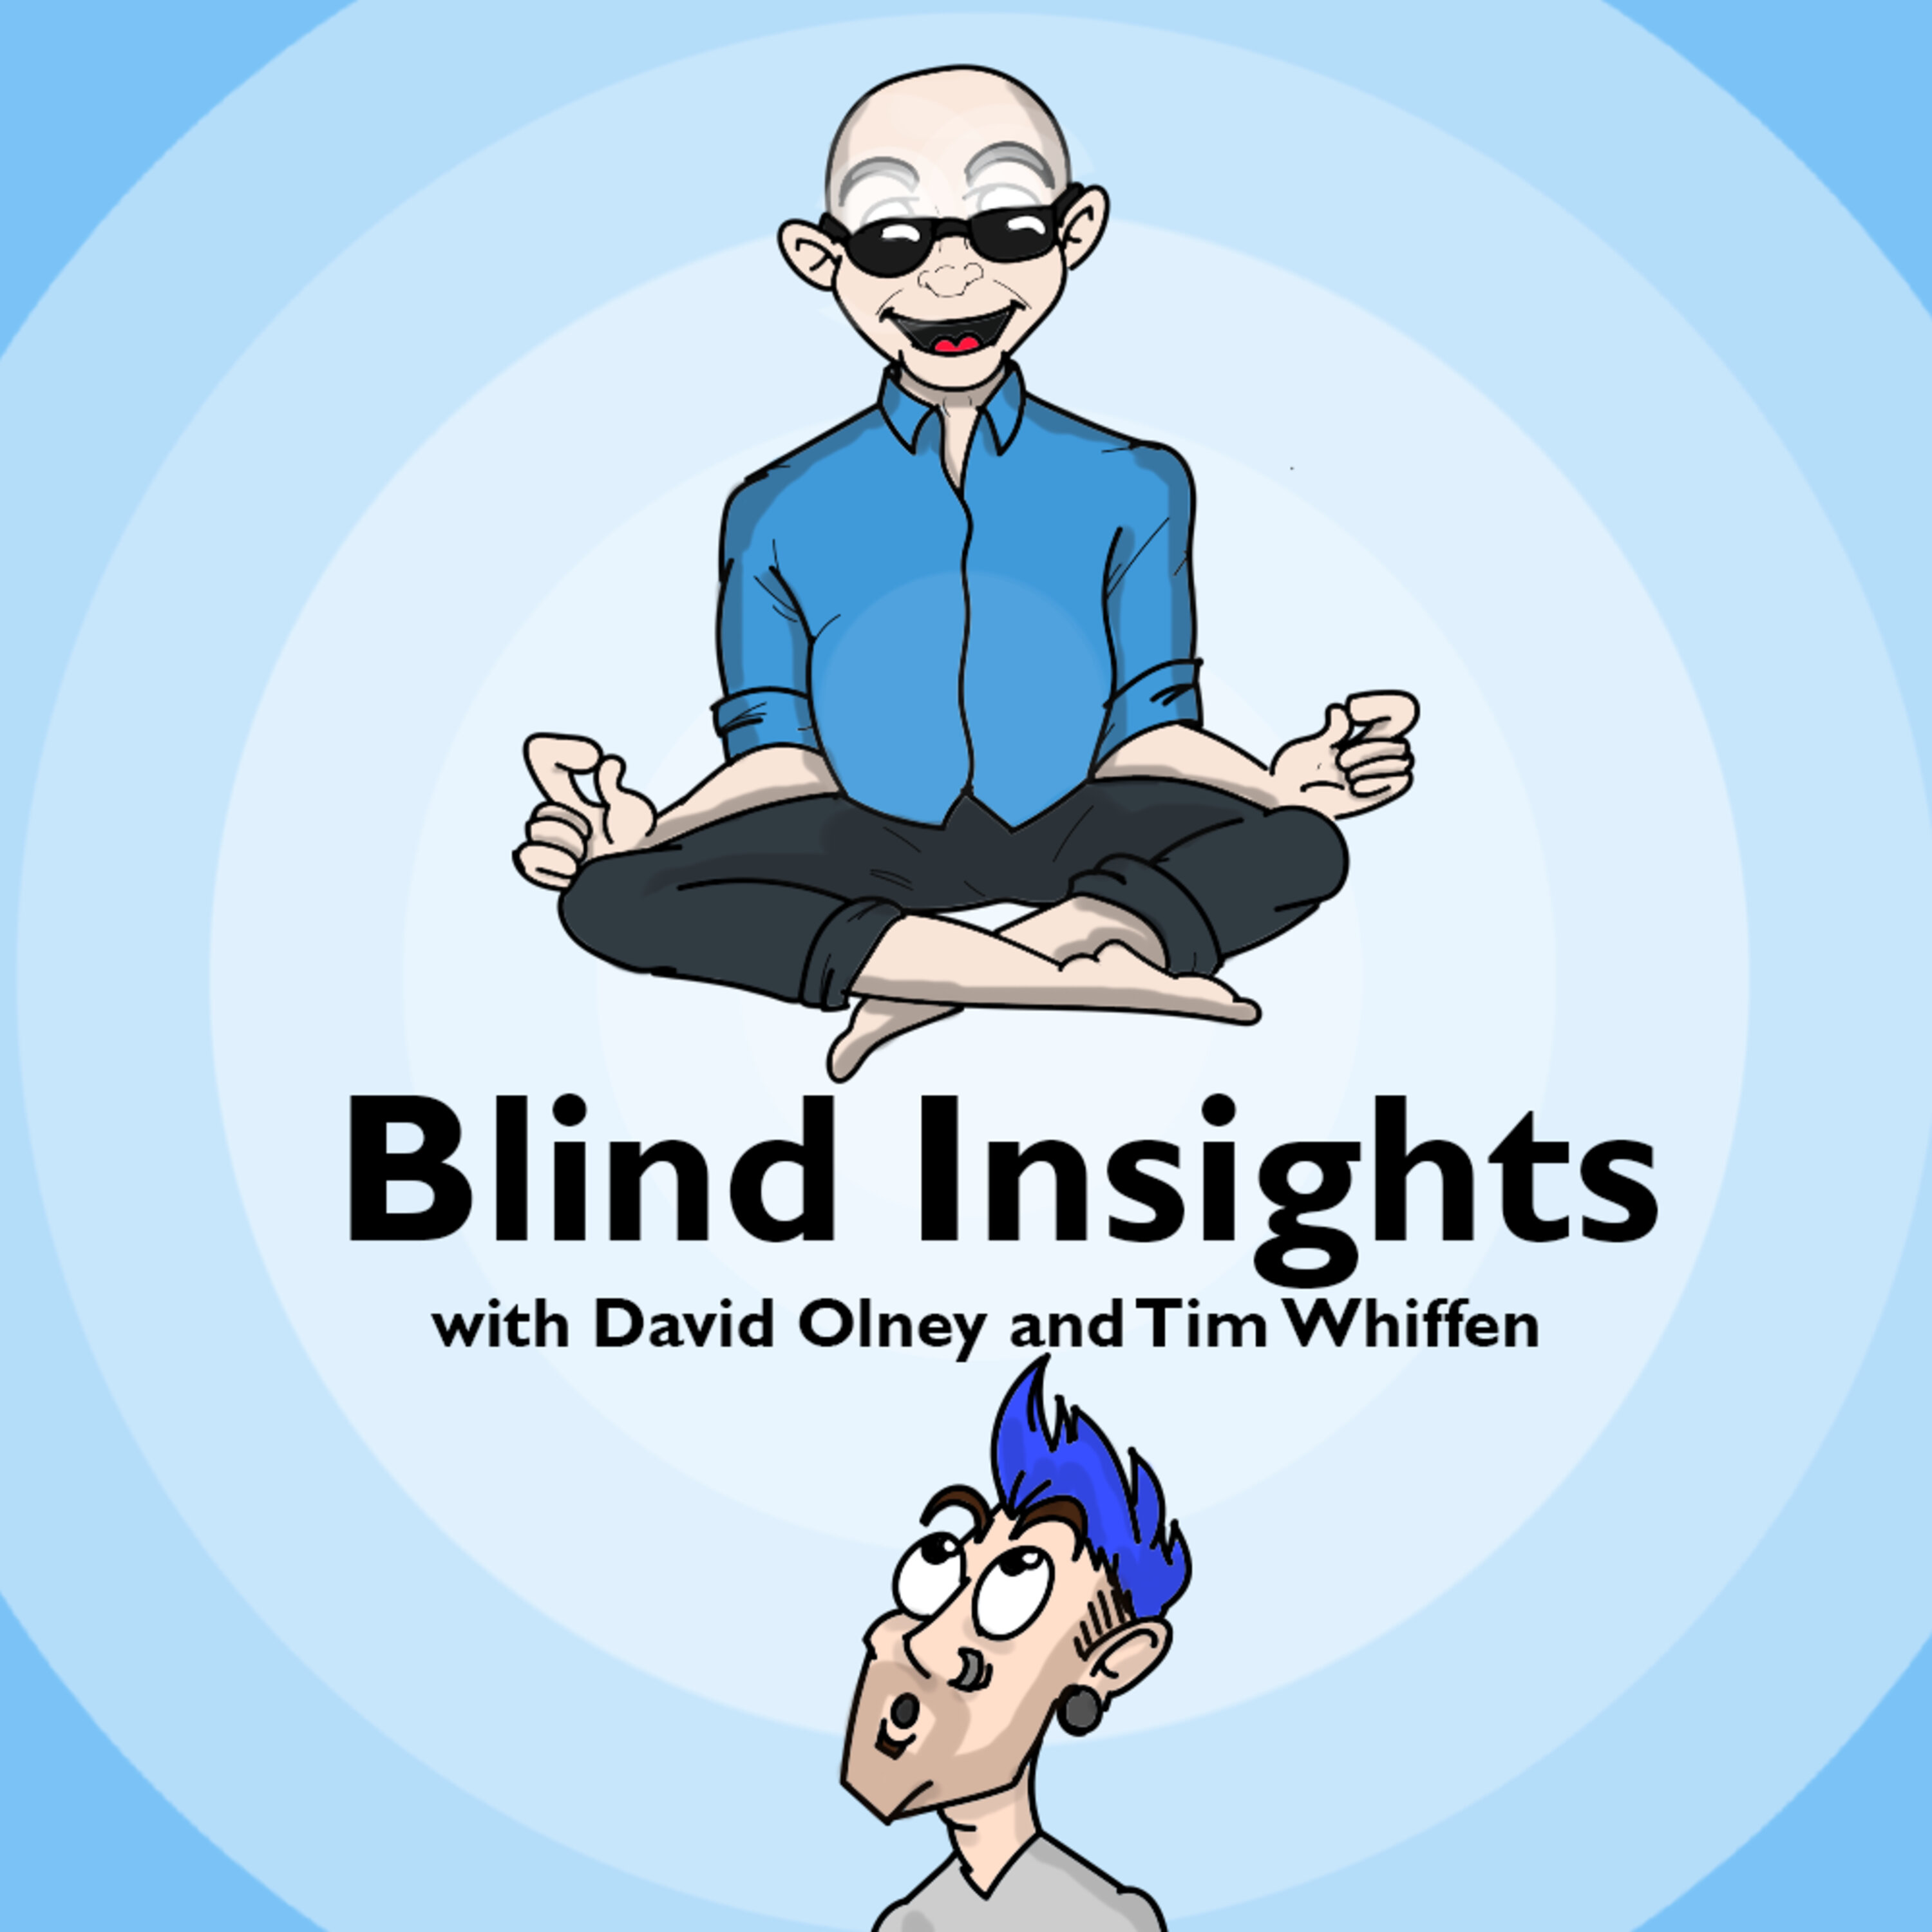 Blind Insights - An Insight to Blindness